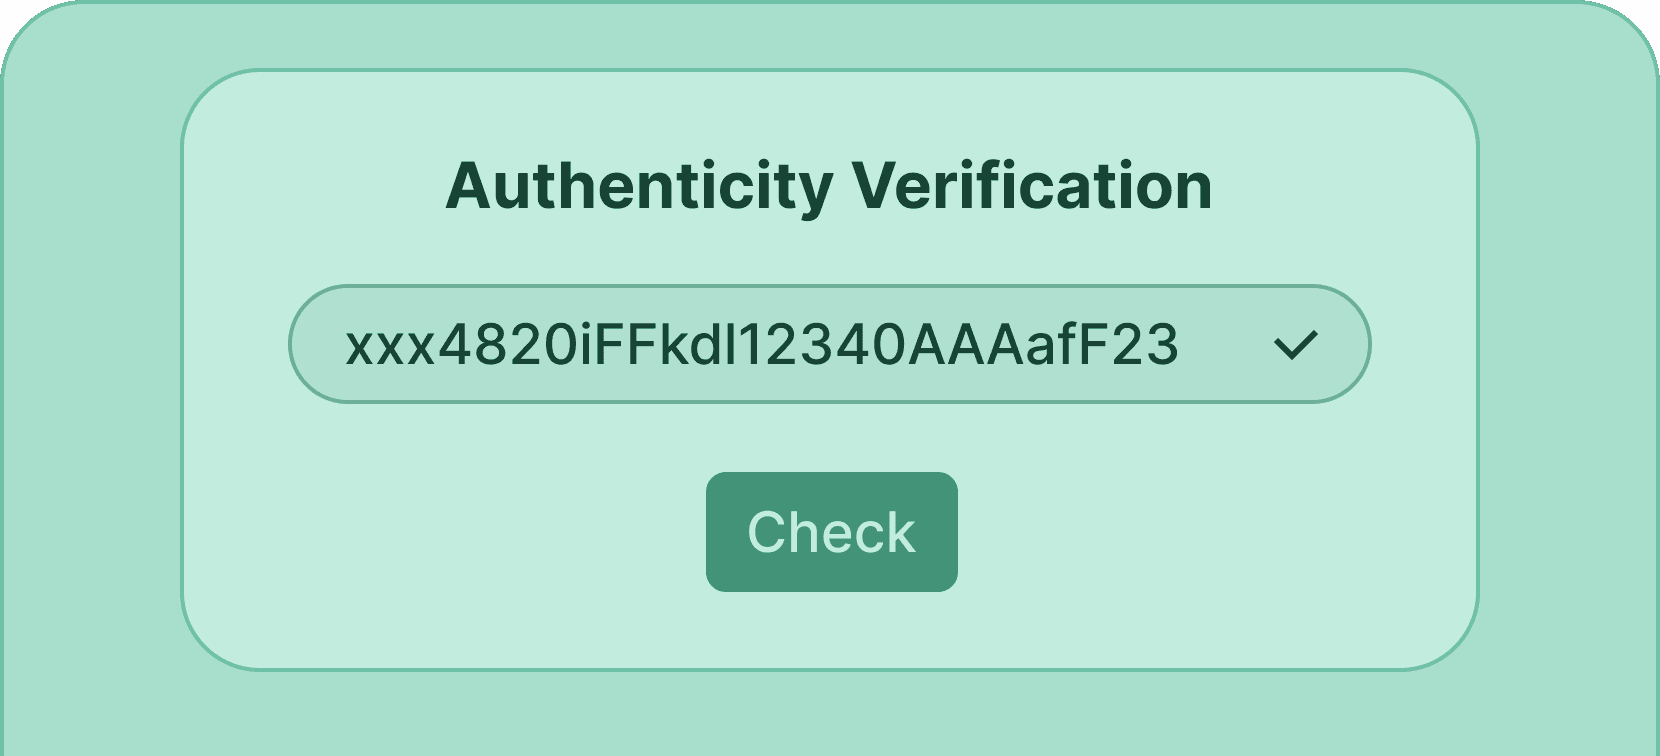 Uuid based verification - Certifier features